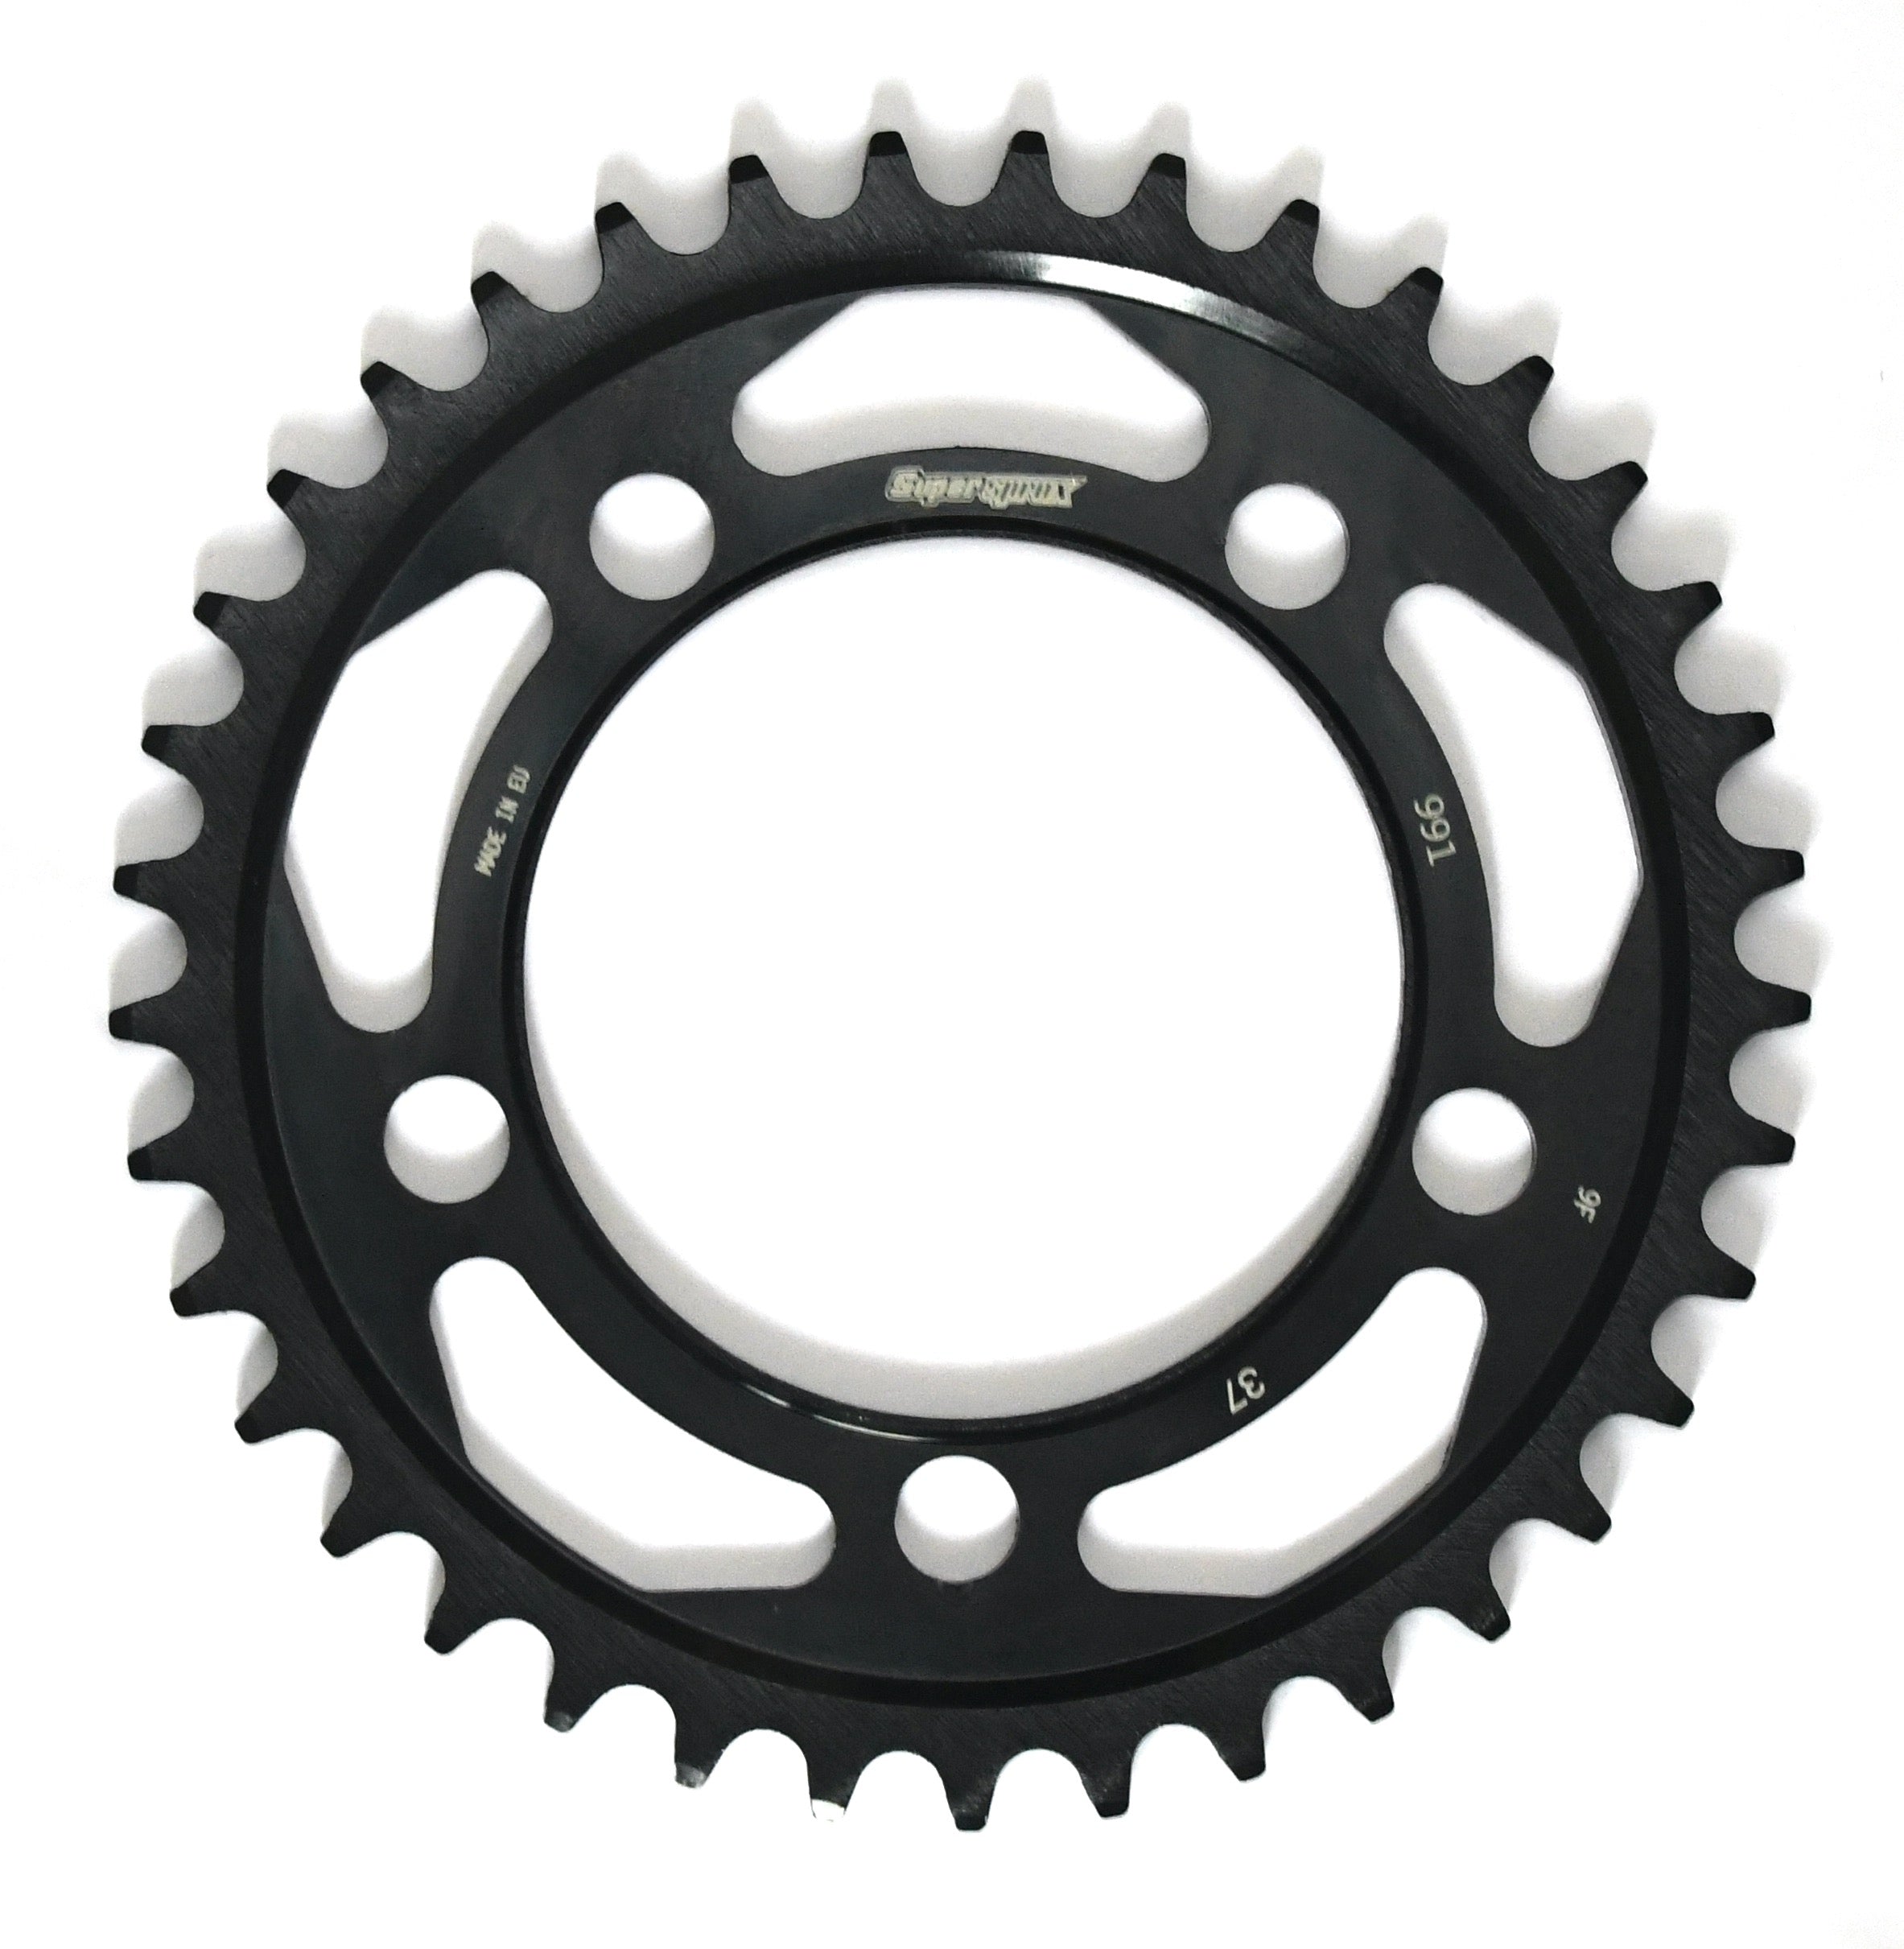 Supersprox Stealth Rear Sprocket RST1306 - Choose Your Gearing